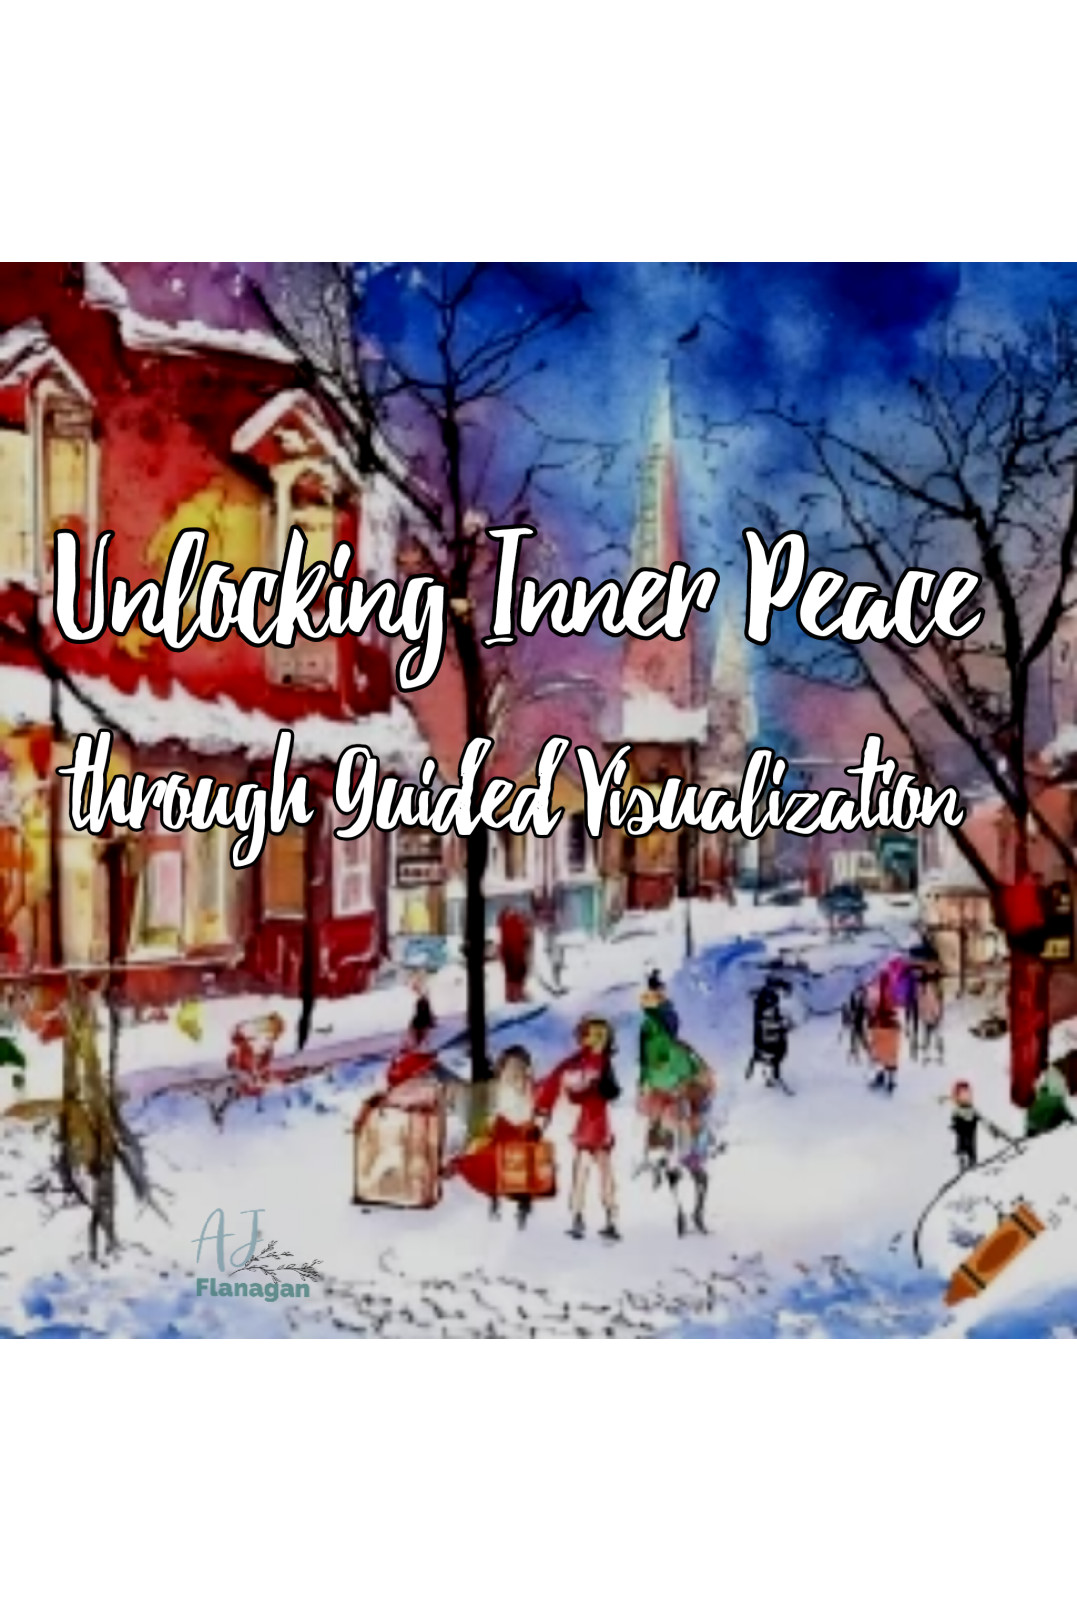 Unlocking Inner Peace through Guided Visualization